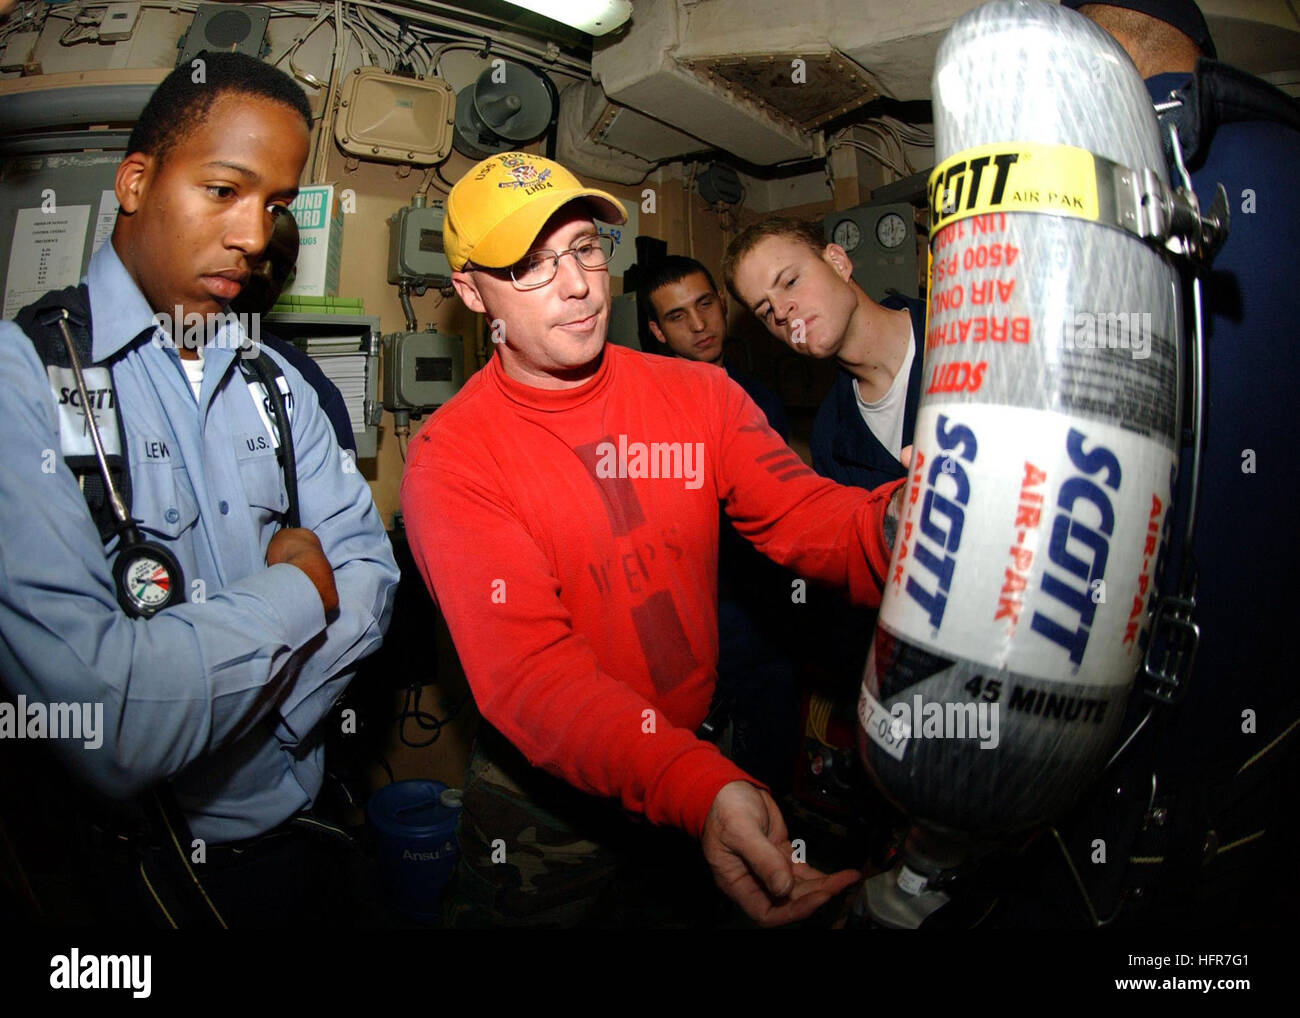 060608-N-5917H-006 Pacific Ocean (June 8, 2006) - Aviation Ordanceman 1st Class Jacques Beaver explains how to use the Self Contained Breathing Apparatus (SCBA) to repair locker members during training aboard the amphibious assault ship USS Boxer (LHD 4). Boxer is actively transitioning to the SCBA in preparation for their Western Pacific deployment scheduled later this year. U.S. Navy photo by Photographer's Mate Airman Heather L. Hyatt (RELEASED) US Navy 060608-N-5917H-006 Aviation Ordanceman 1st Class Jacques Beaver explains how to use the Self Contained Breathing Apparatus (SCBA) to repair Stock Photo